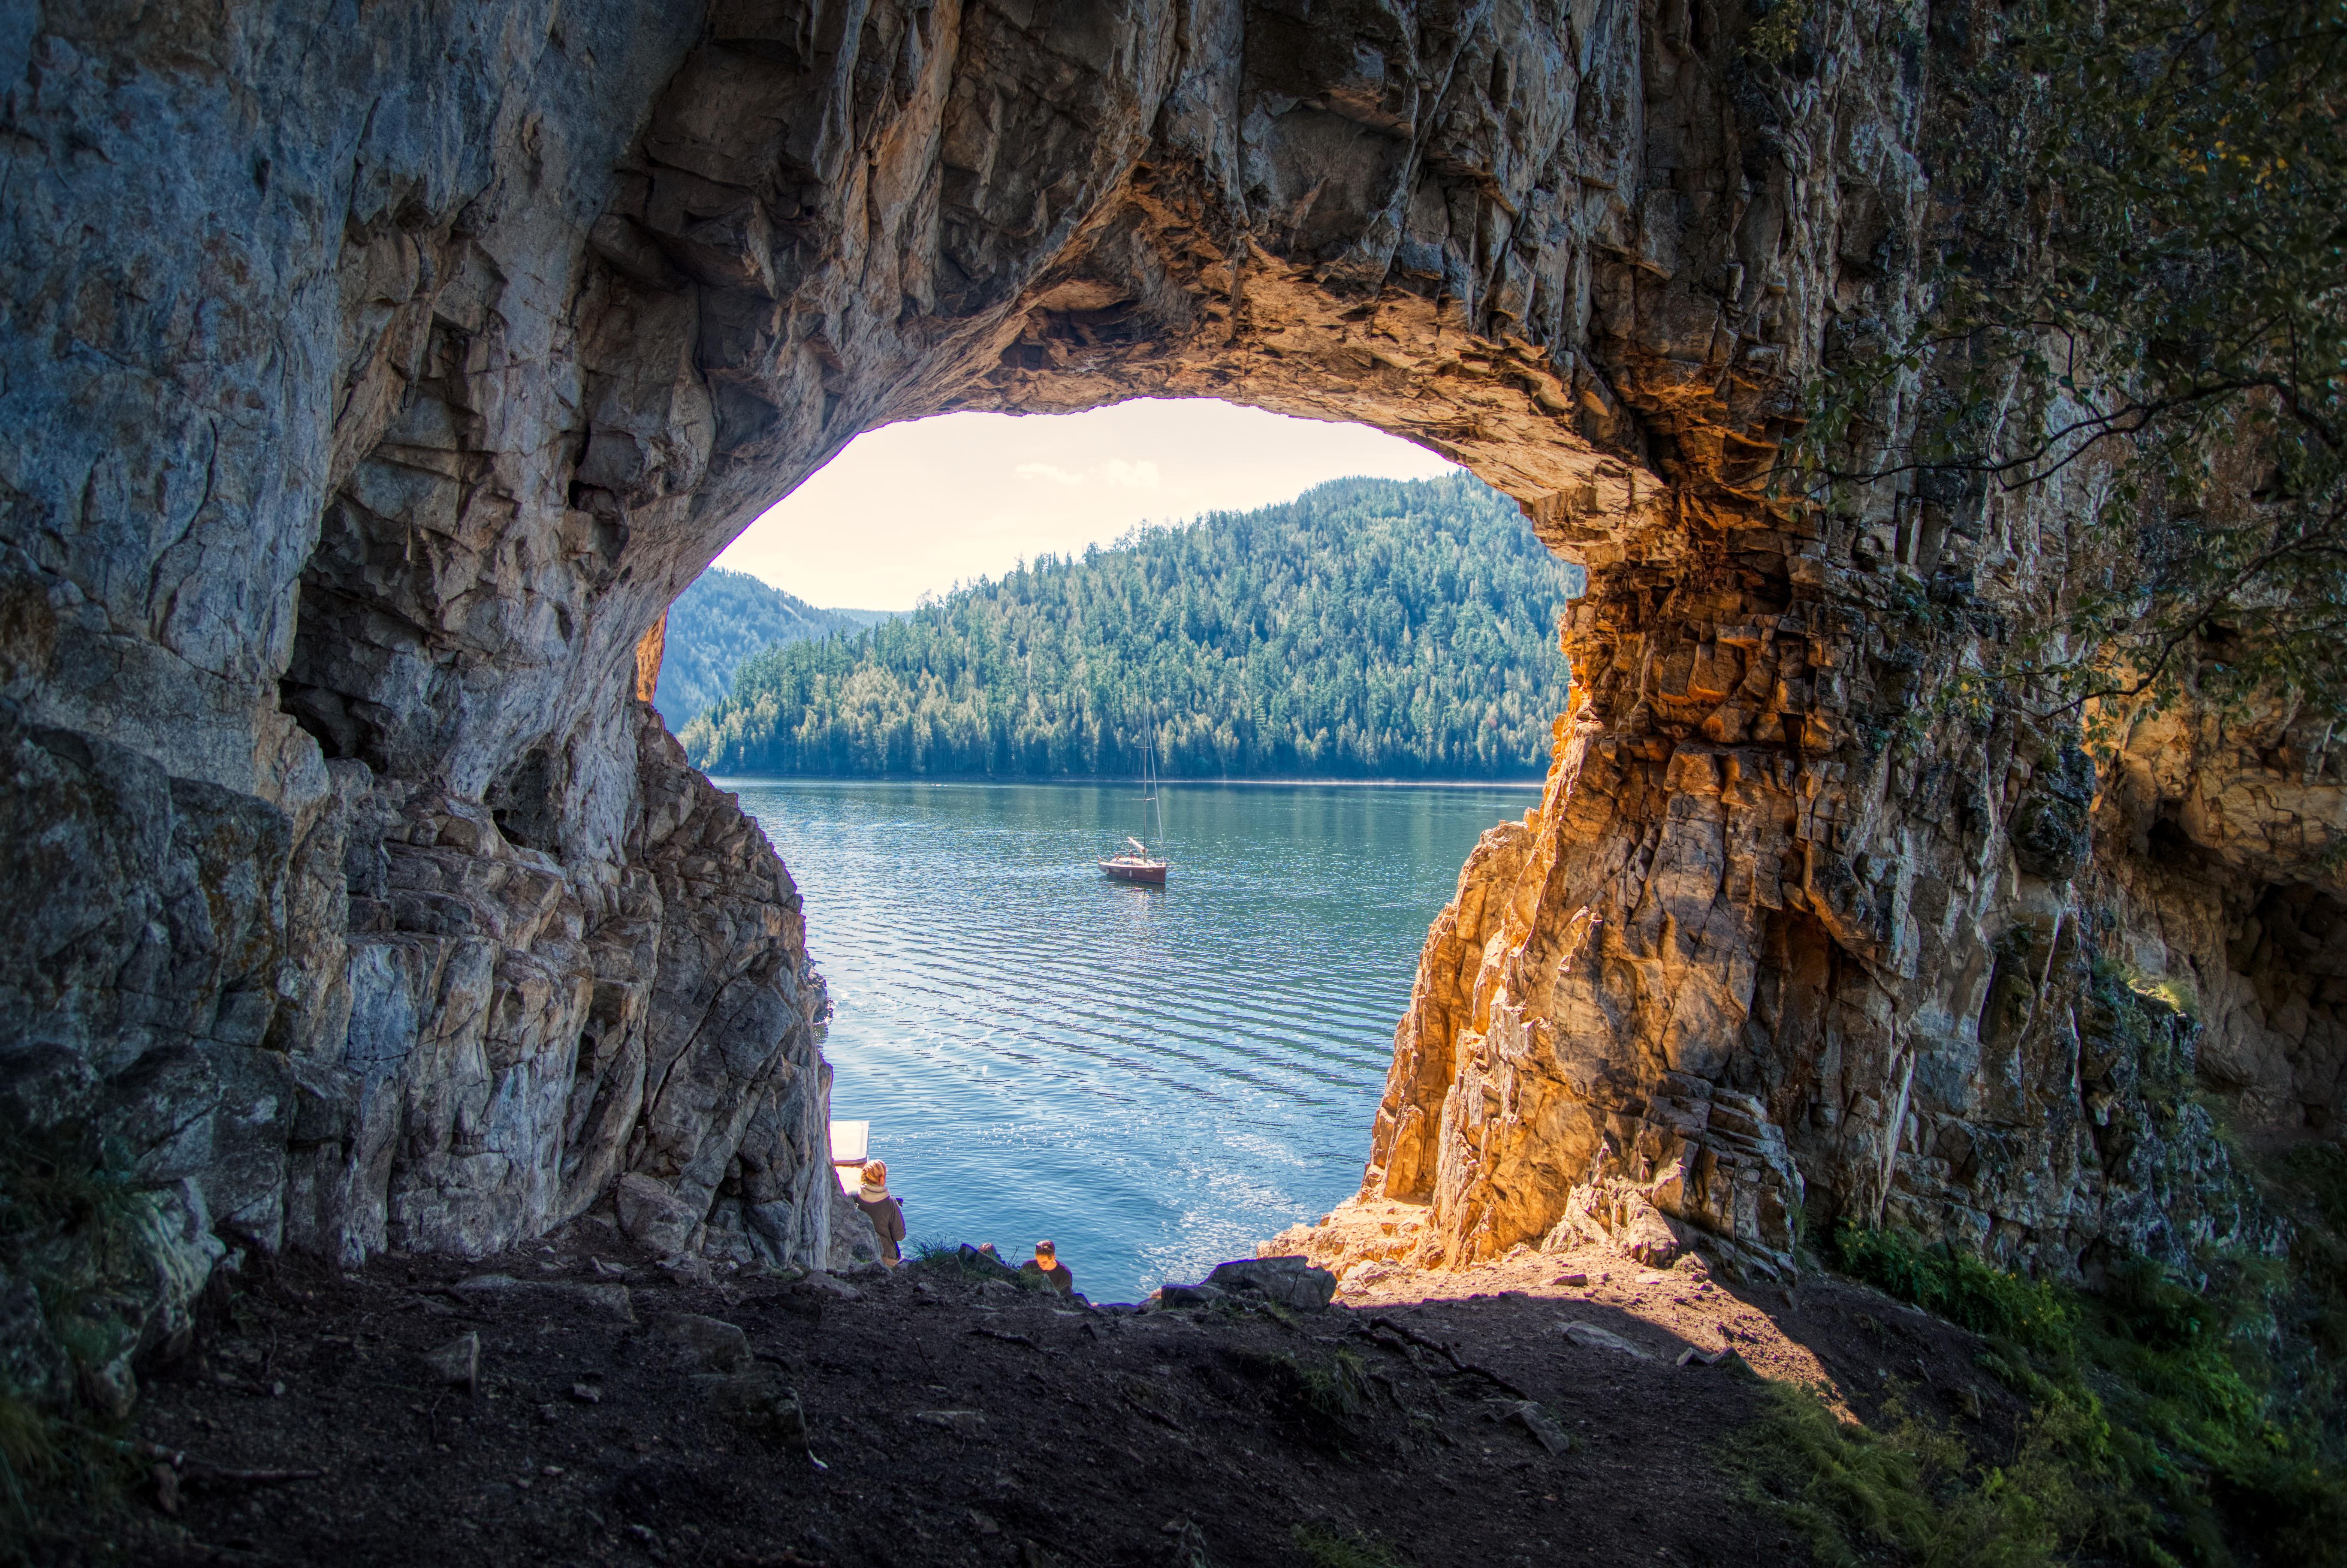 View of the Yenisei through a hole in the rock